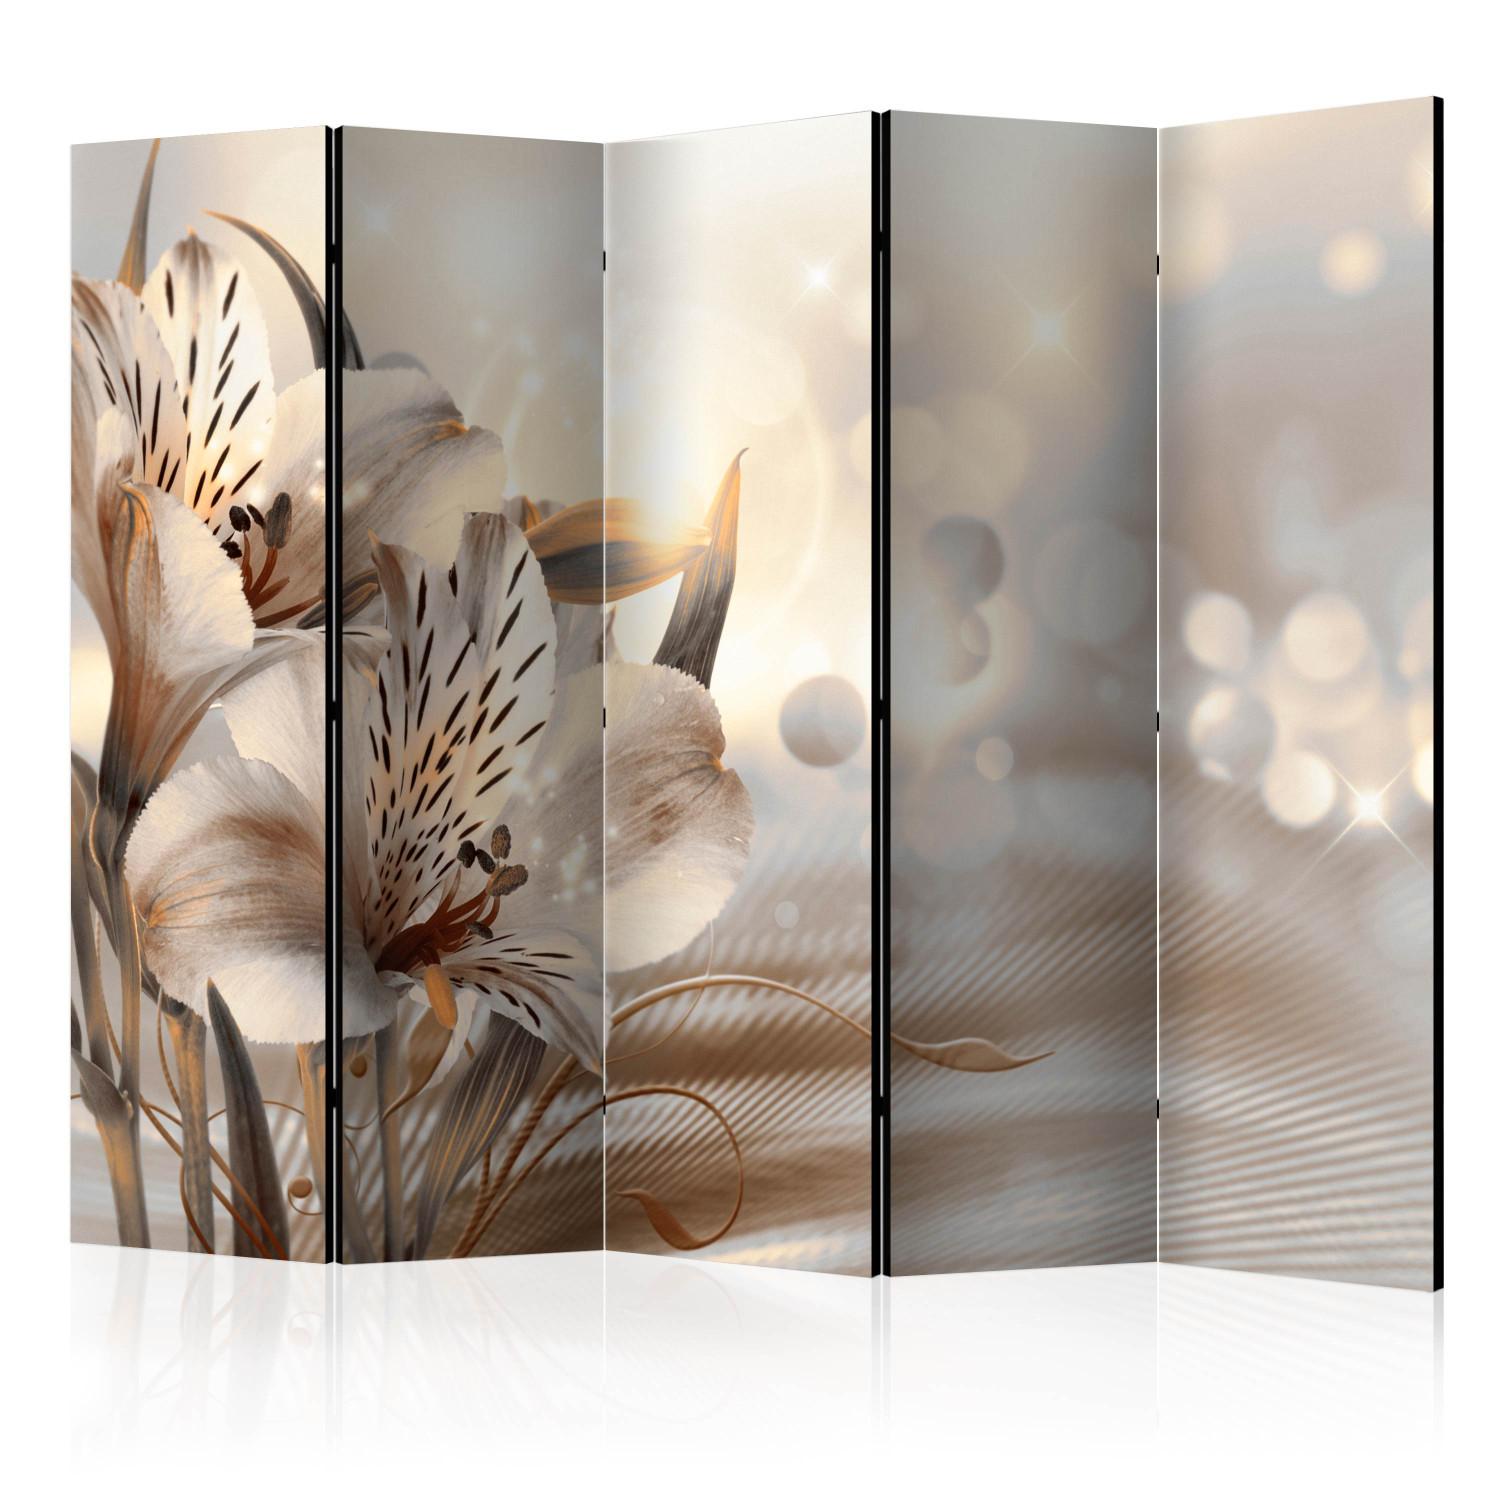 Room Divider Morning Princesses II (5-piece) - 3D illusion of bright lily flowers